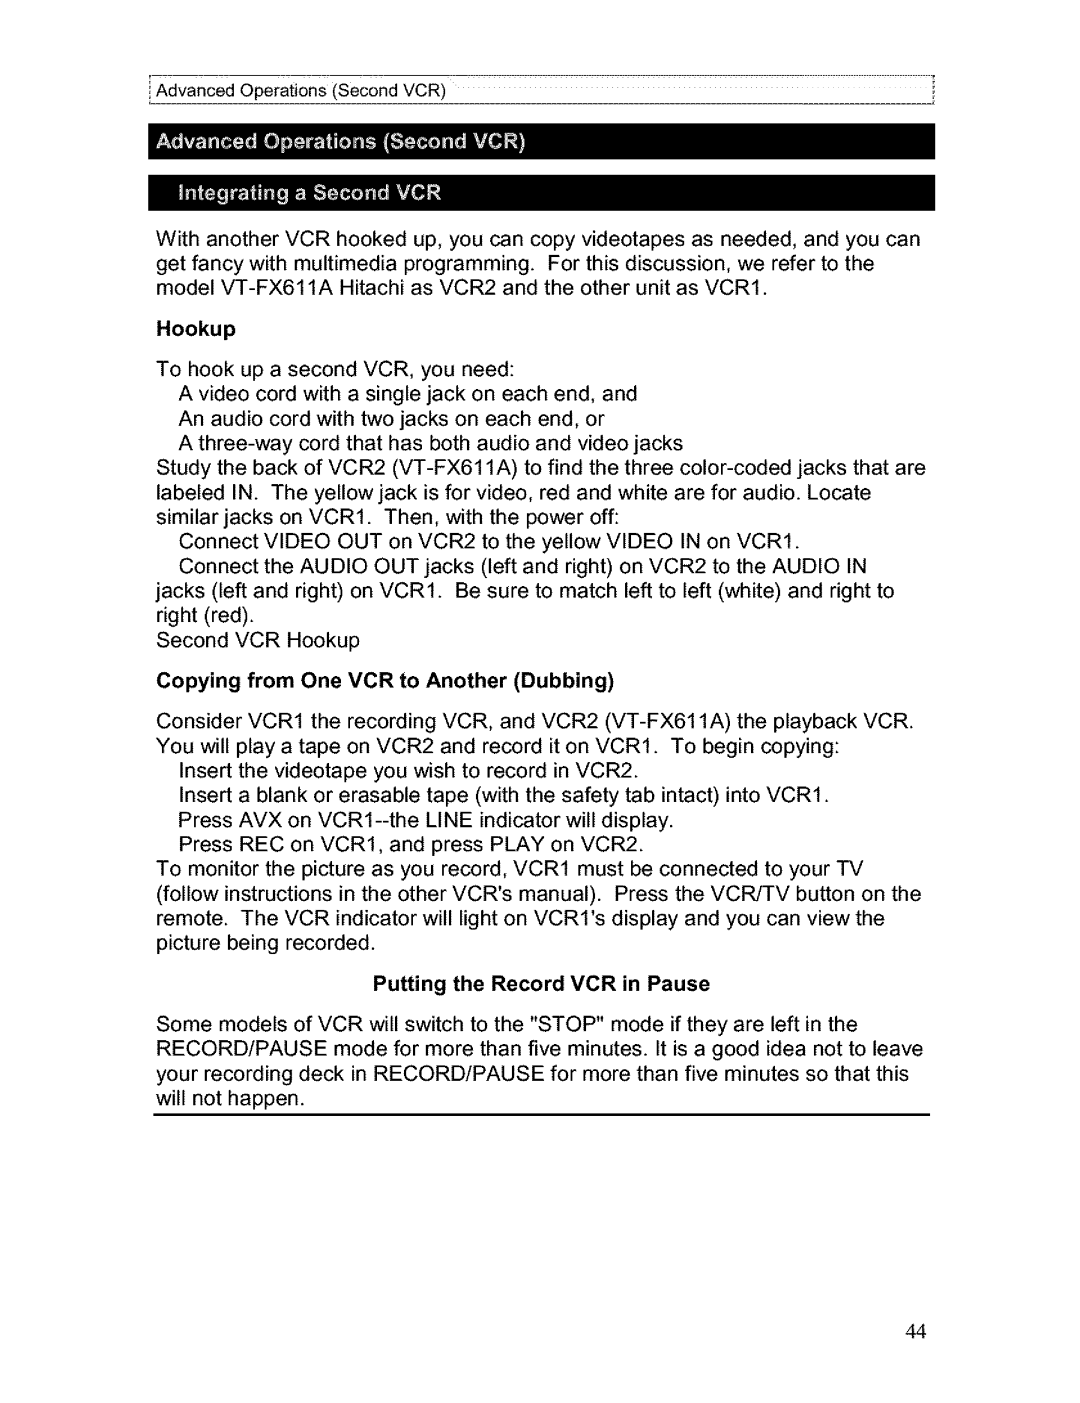 Hitachi VT-FX611A owner manual Copying from One VCR to Another Dubbing, Putting the Record VCR in Pause, Hookup 